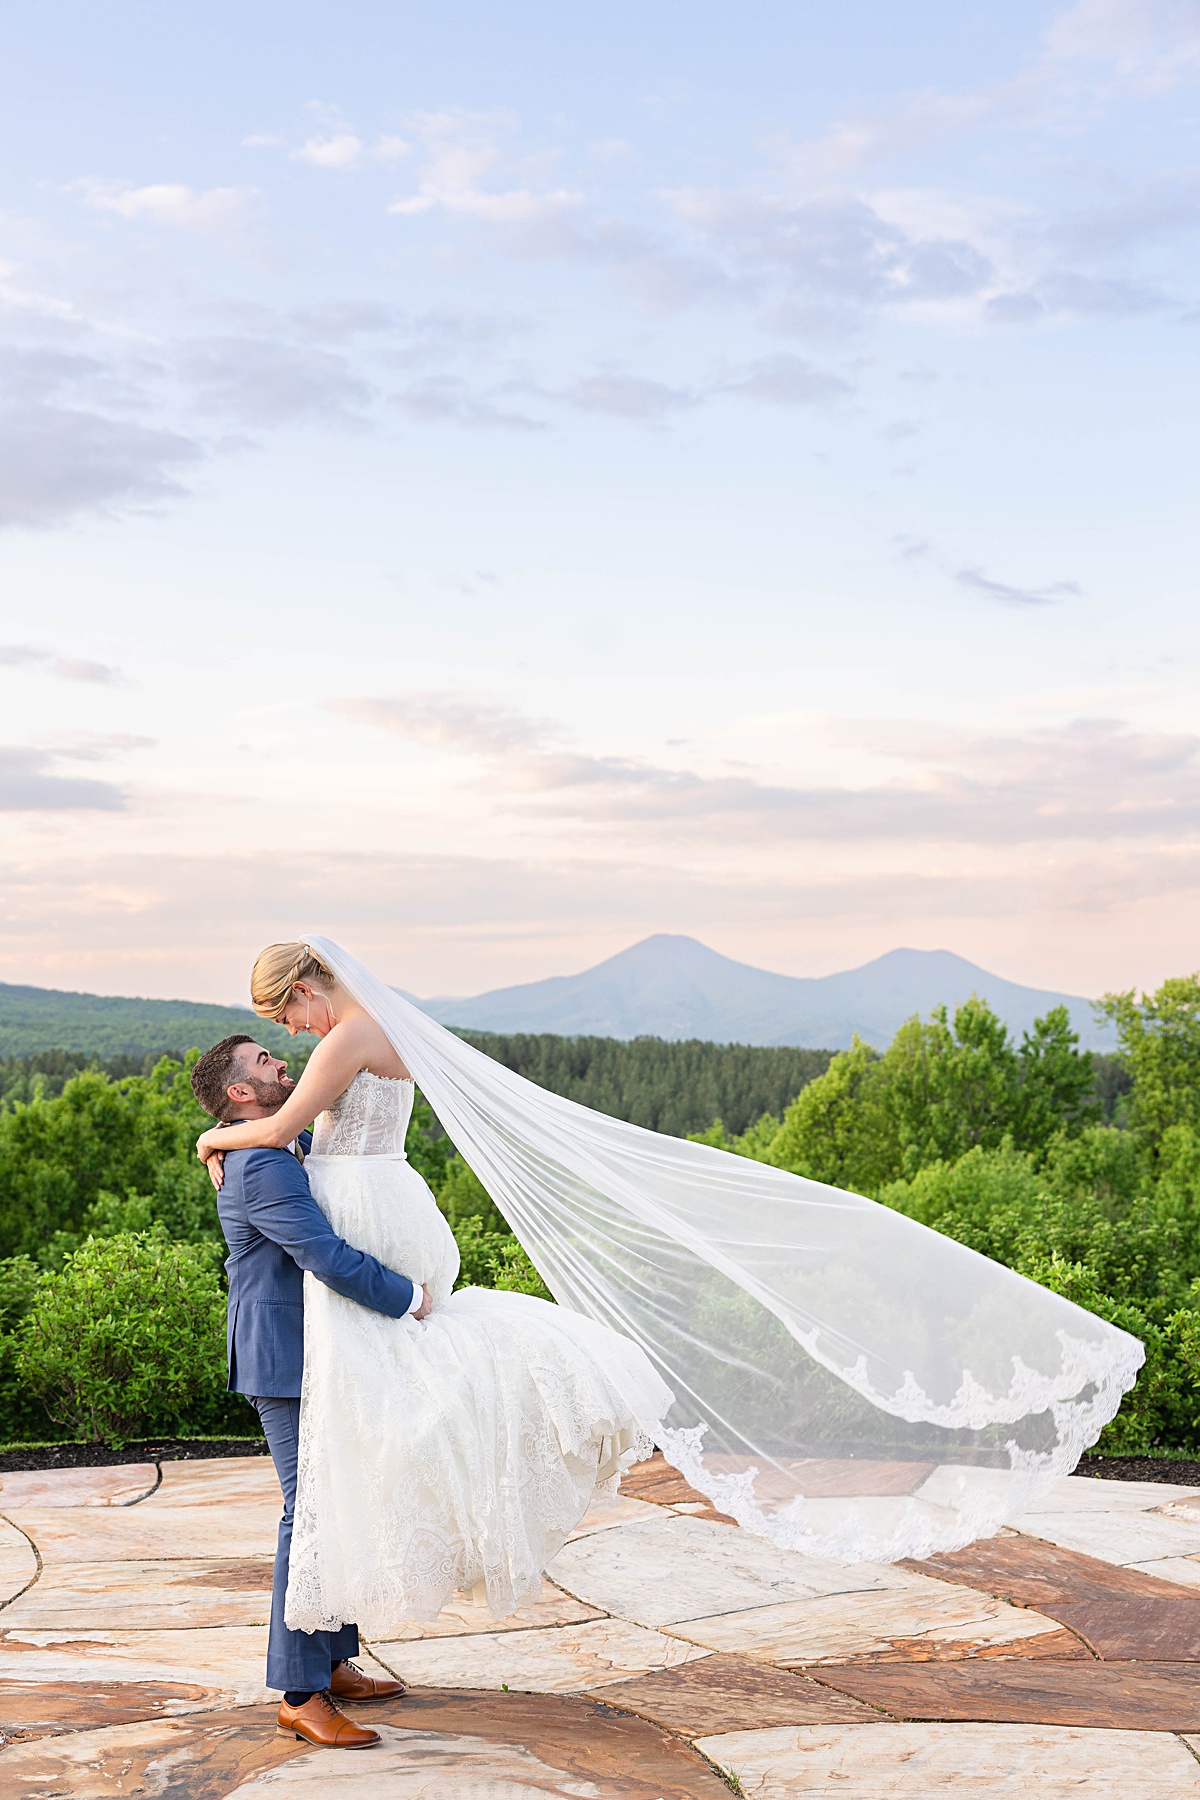 This rustic elegance wedding at The Seclusion features the sweetest groom reaction during the ceremony, carefully selected family heirlooms, wildflowers, and one of my favorite sunsets at The Seclusion in Lexington, Virginia.